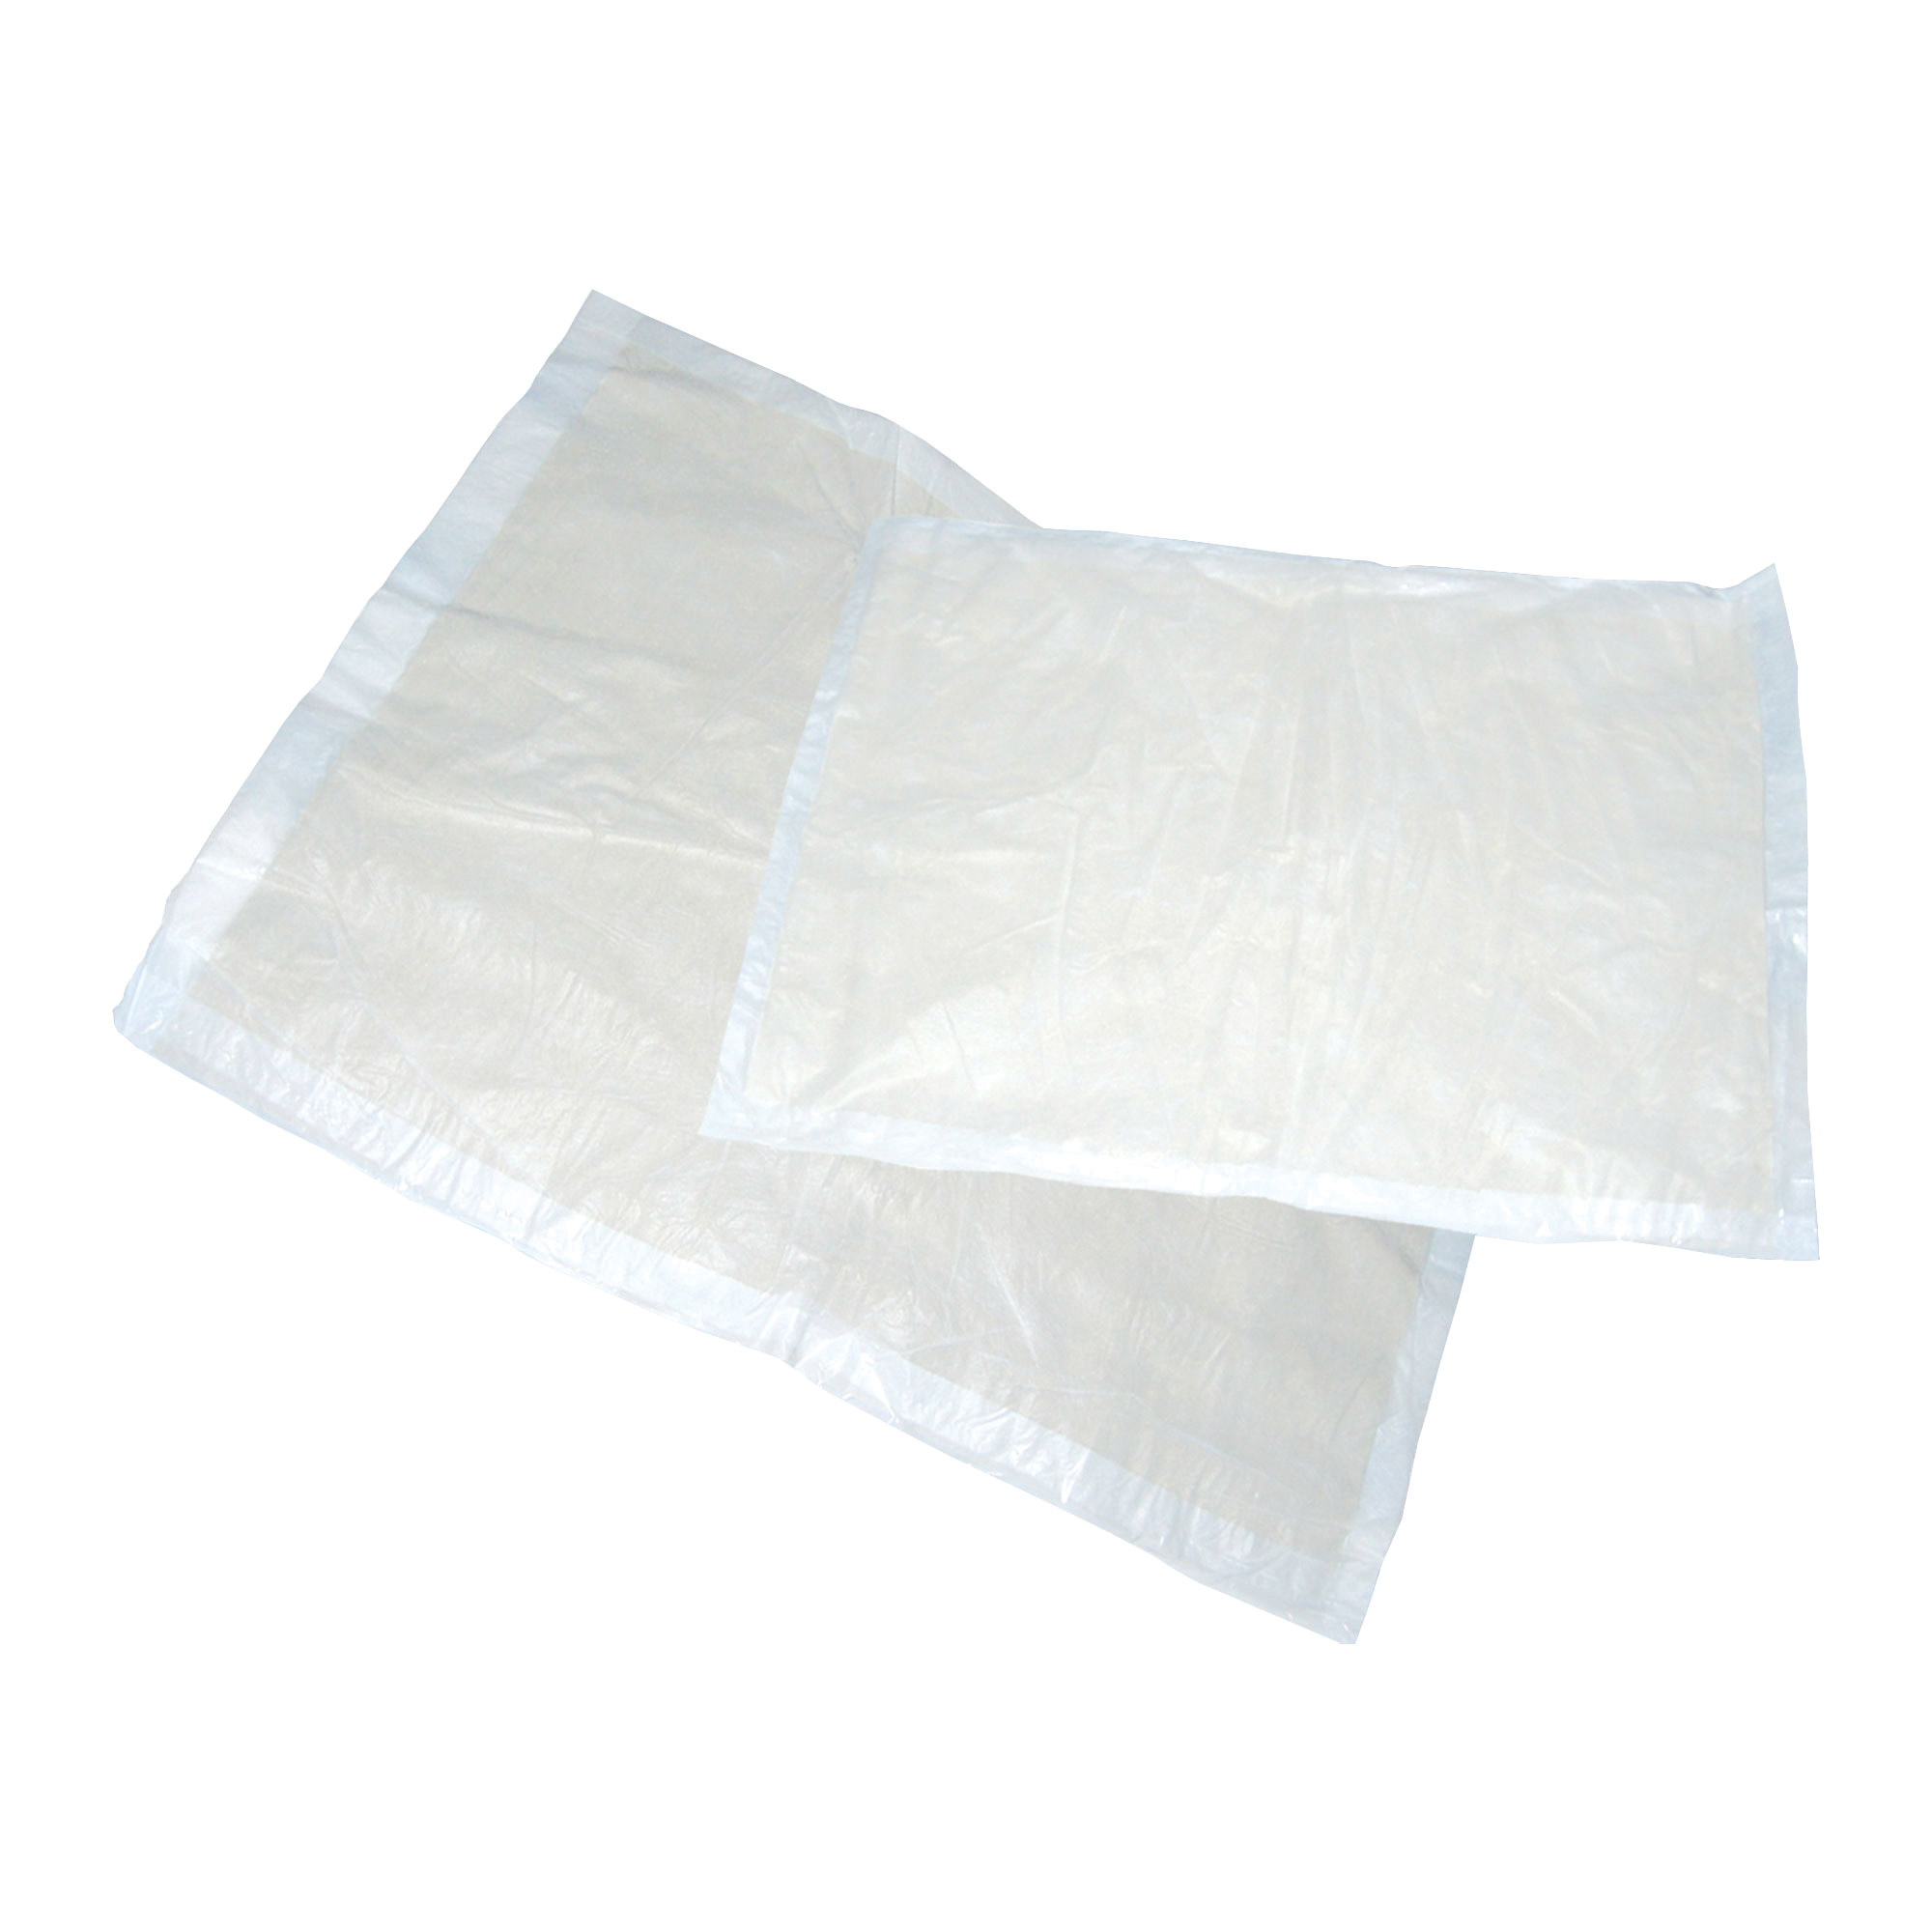 Primacare 5 Ply Disposable Bed Pads - 40 x 60cm